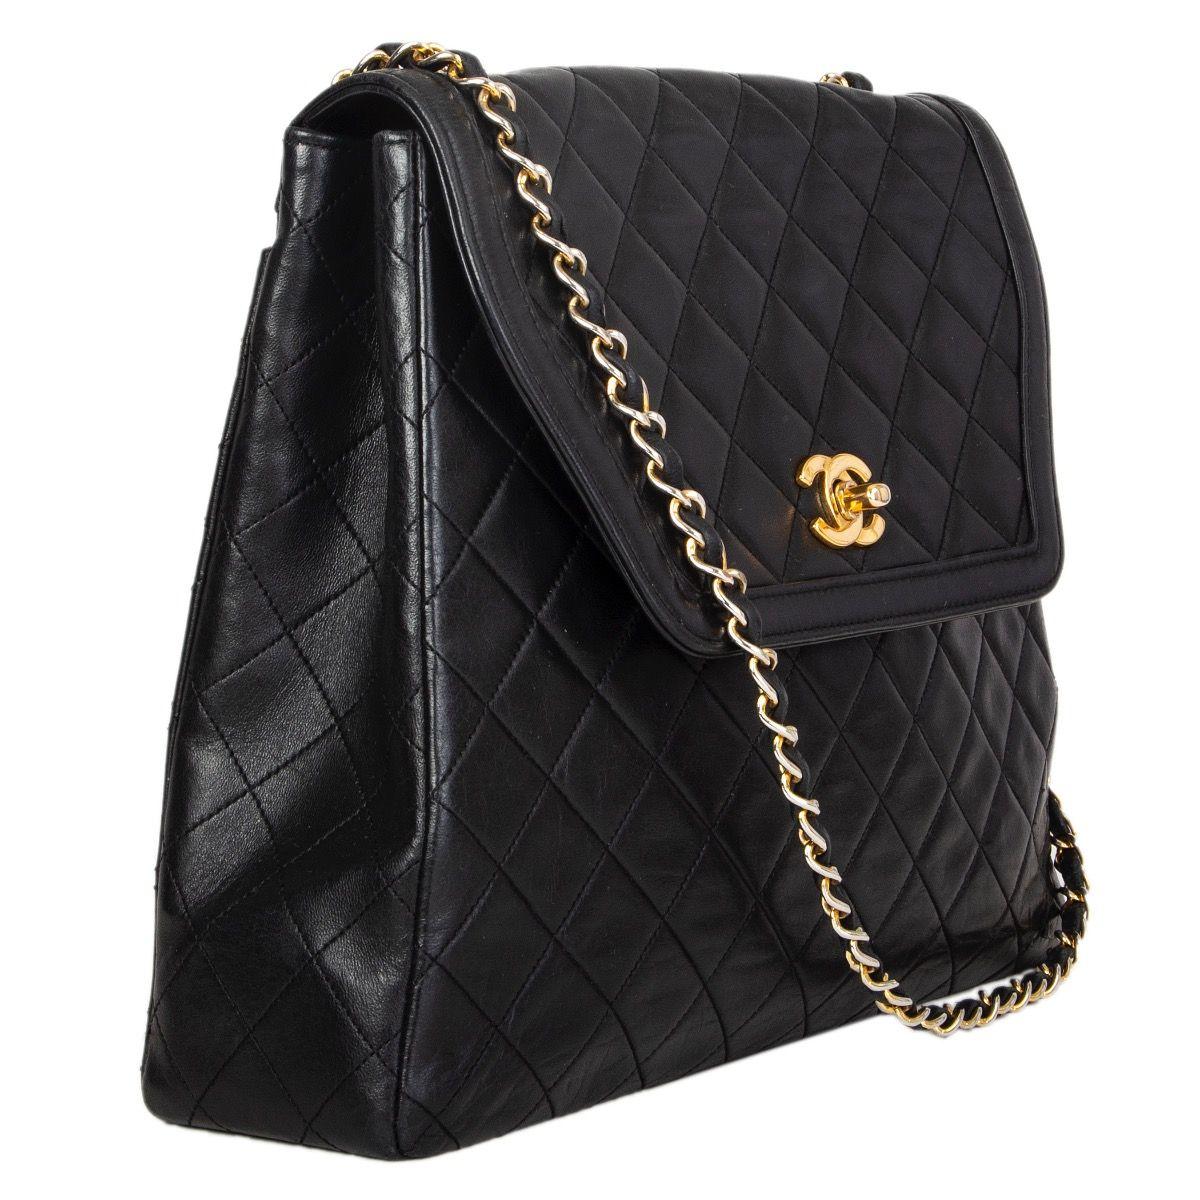 Chanel Vintage trapeze shaped flap bag in black quilted leather with a open pocket on the back side. Opens with a 'CC' turn-lock and is lined in burgundy leather with one open pocket against the back. Has been carried with signs of wear allover